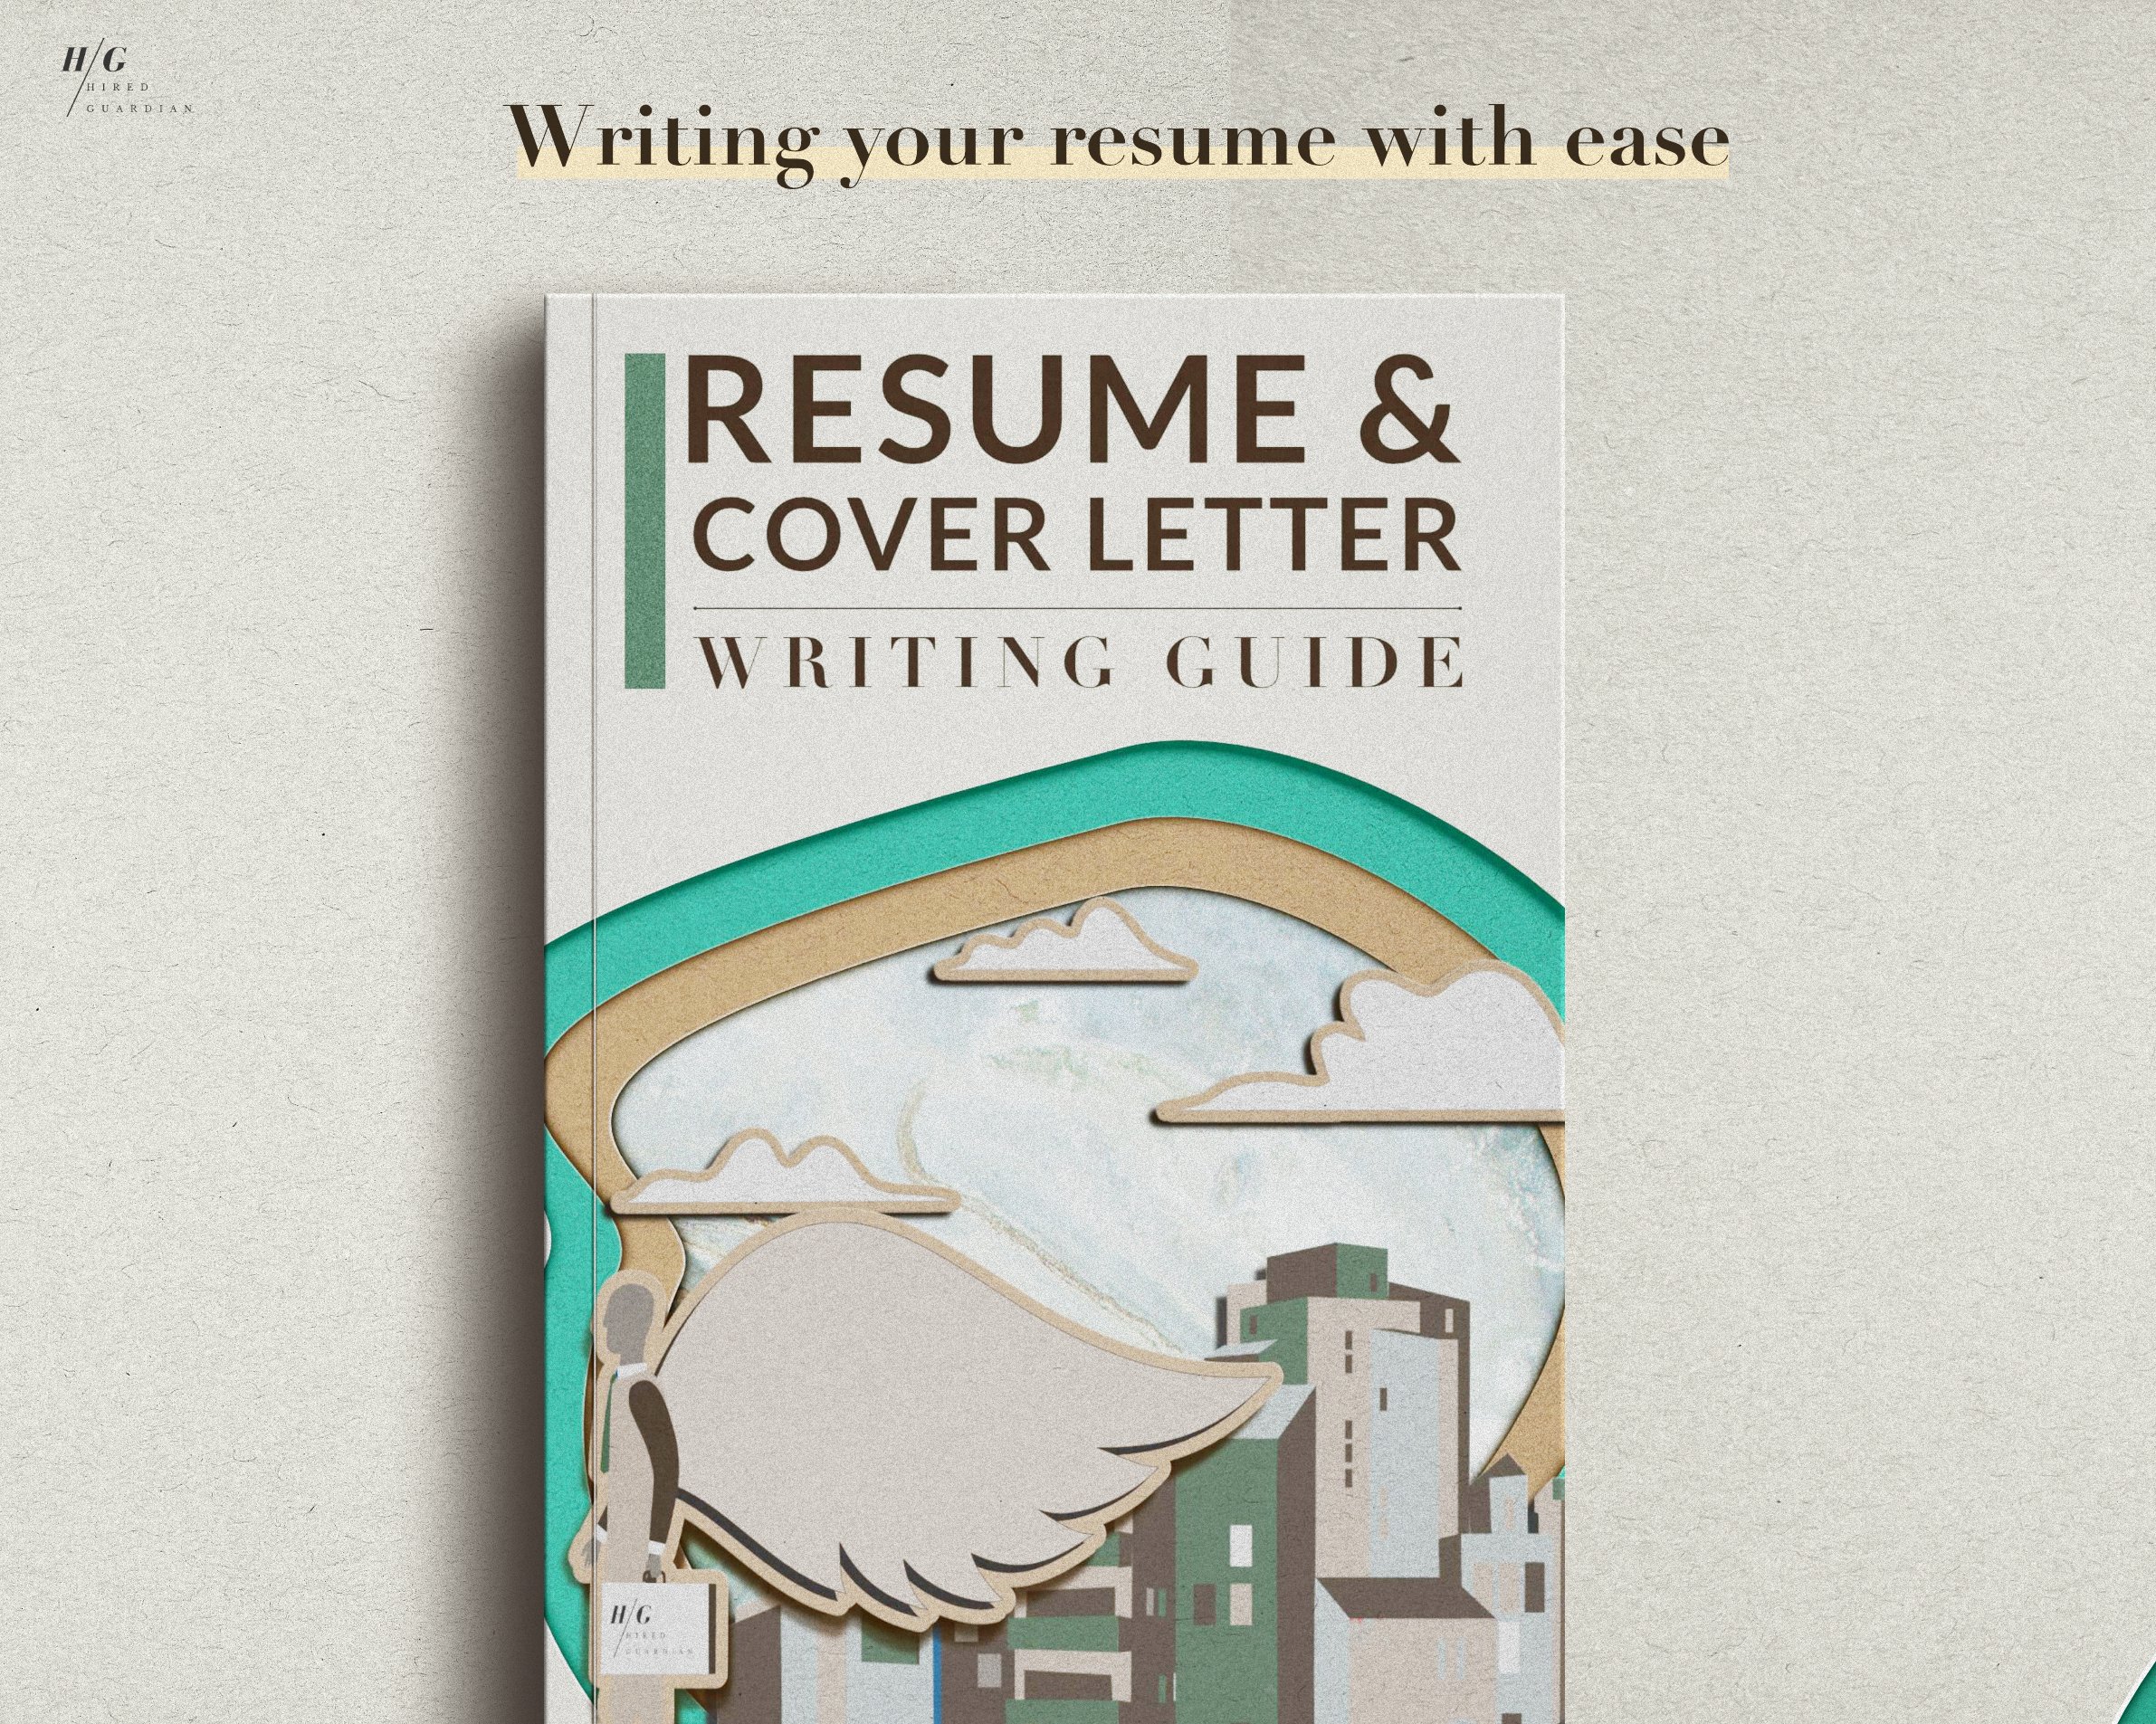 The cover of a resume and cover letter writing guide.